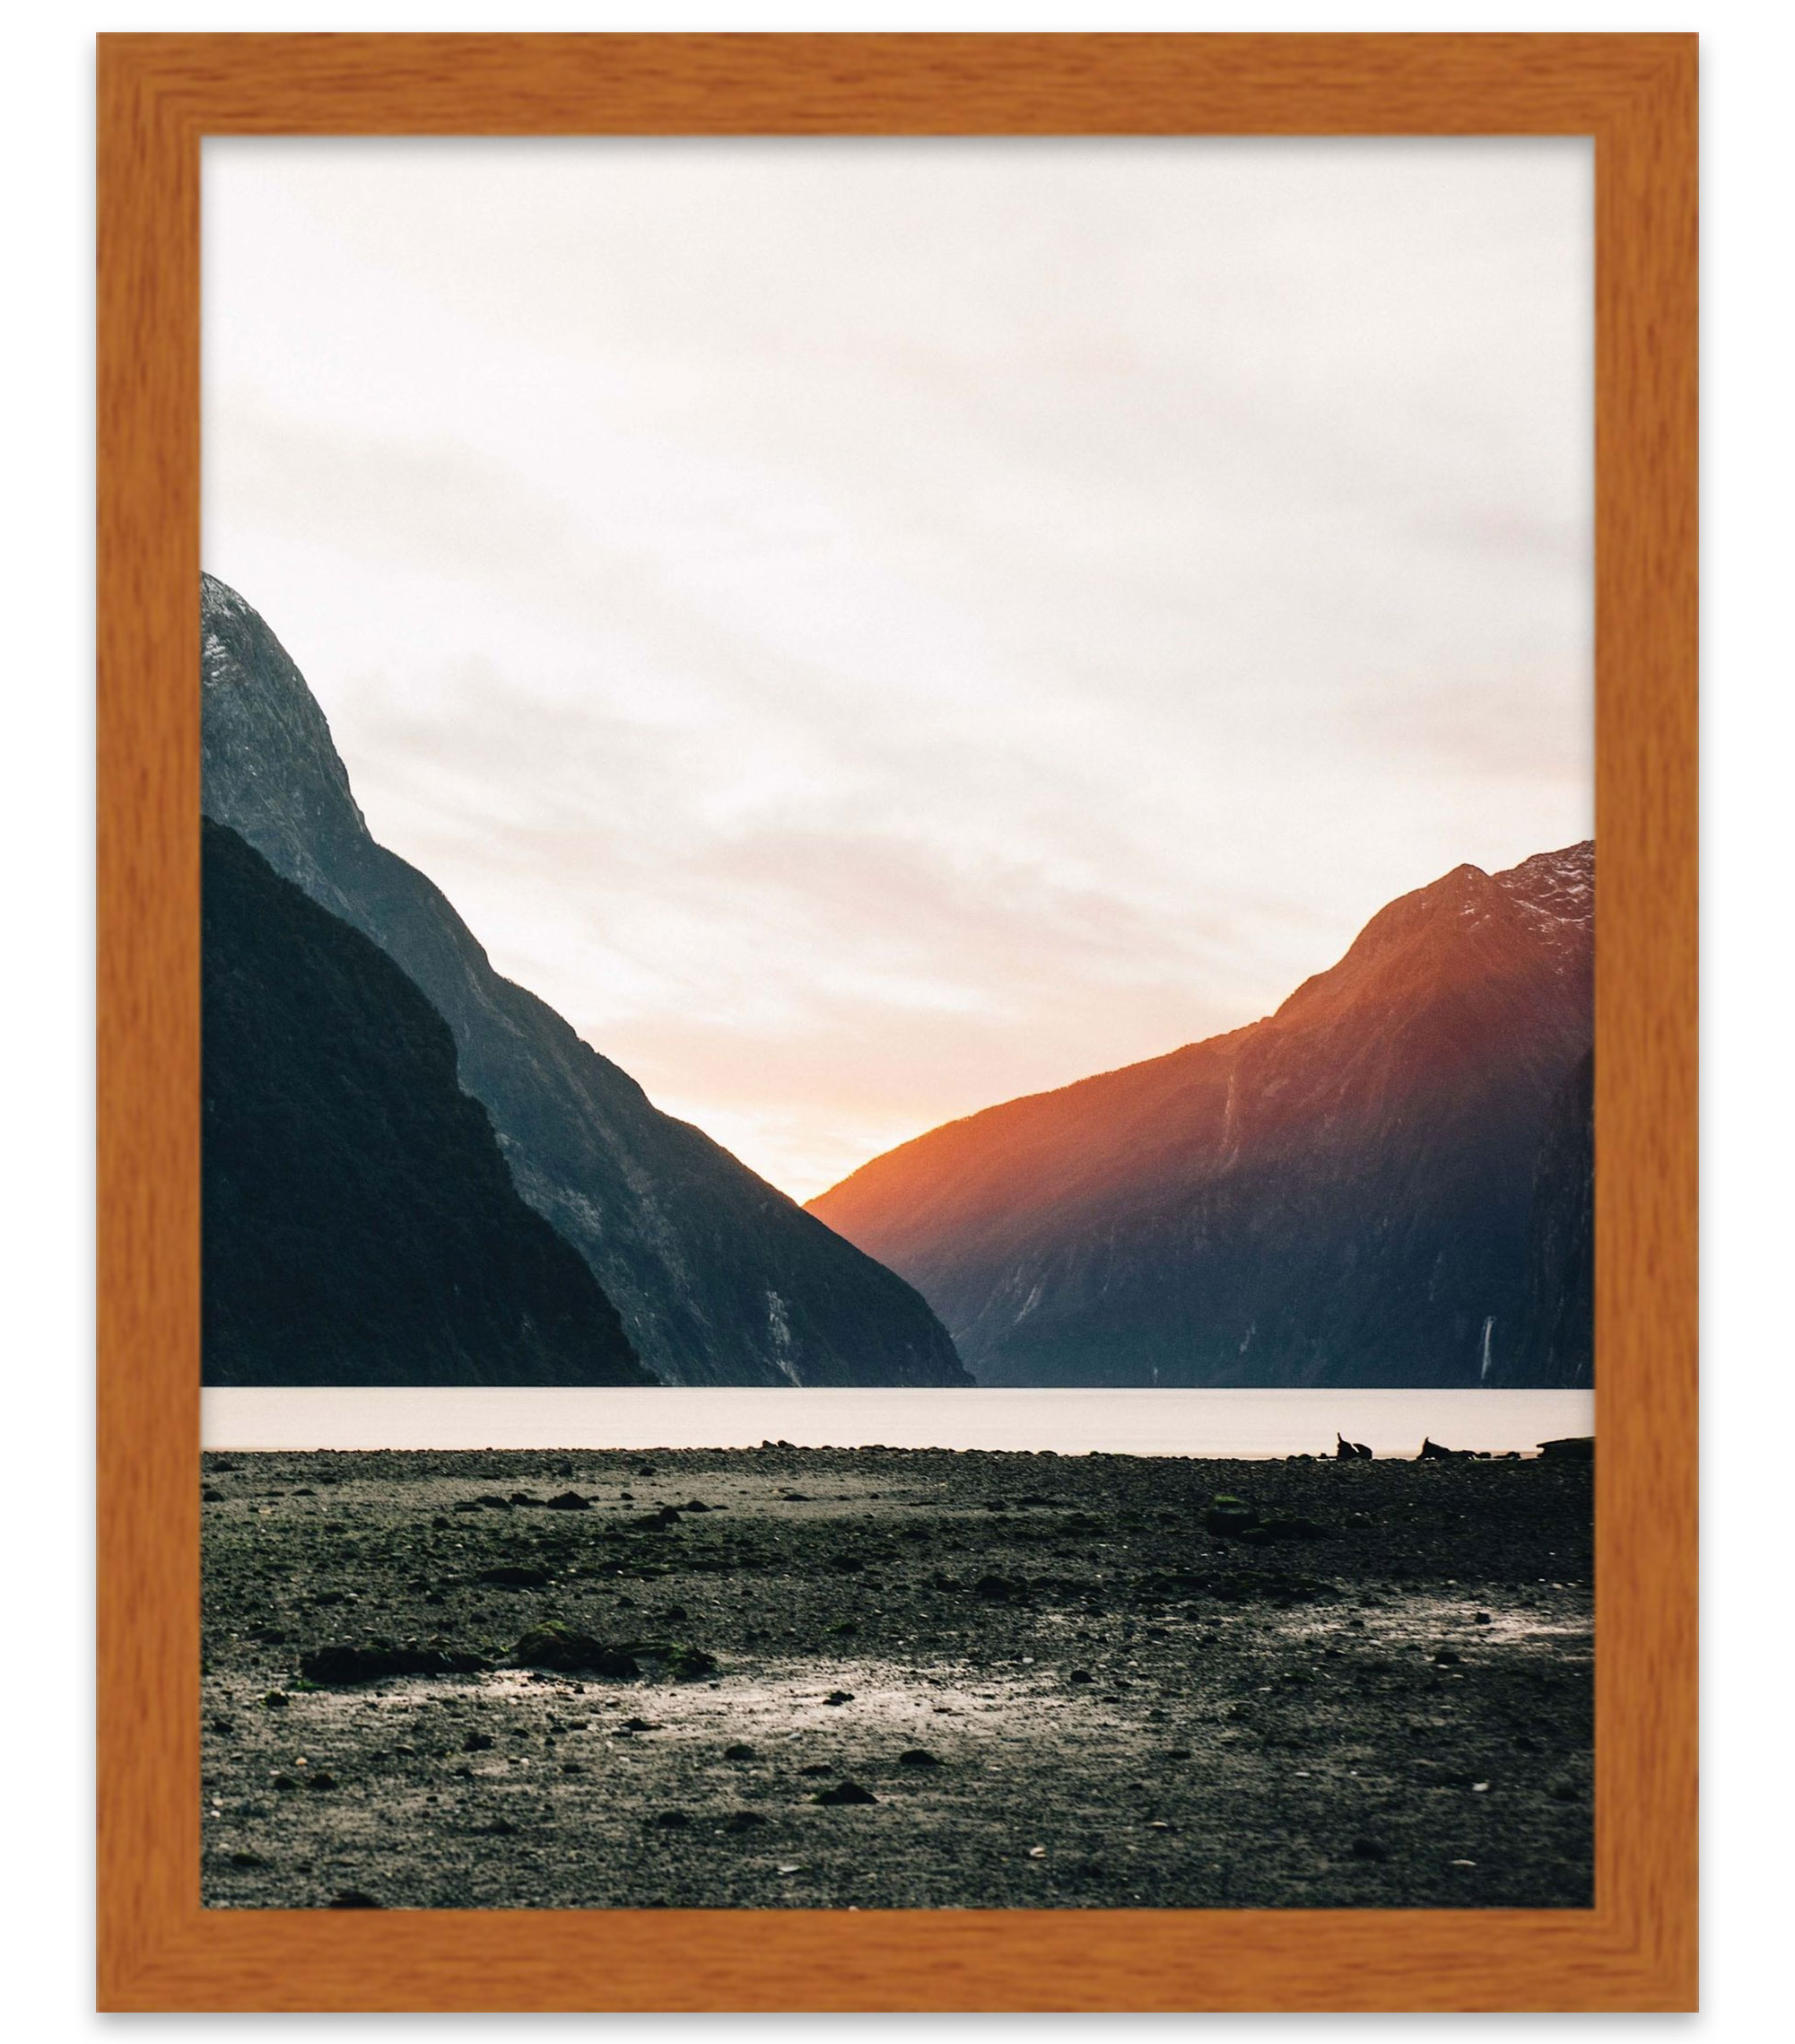 CustomPictureFrames.com 20x24 Flat Walnut Brown Wood Frame - "The Edge" Thin - Great for Posters, Photos, Art Prints, Mirror, Chalk Boards,